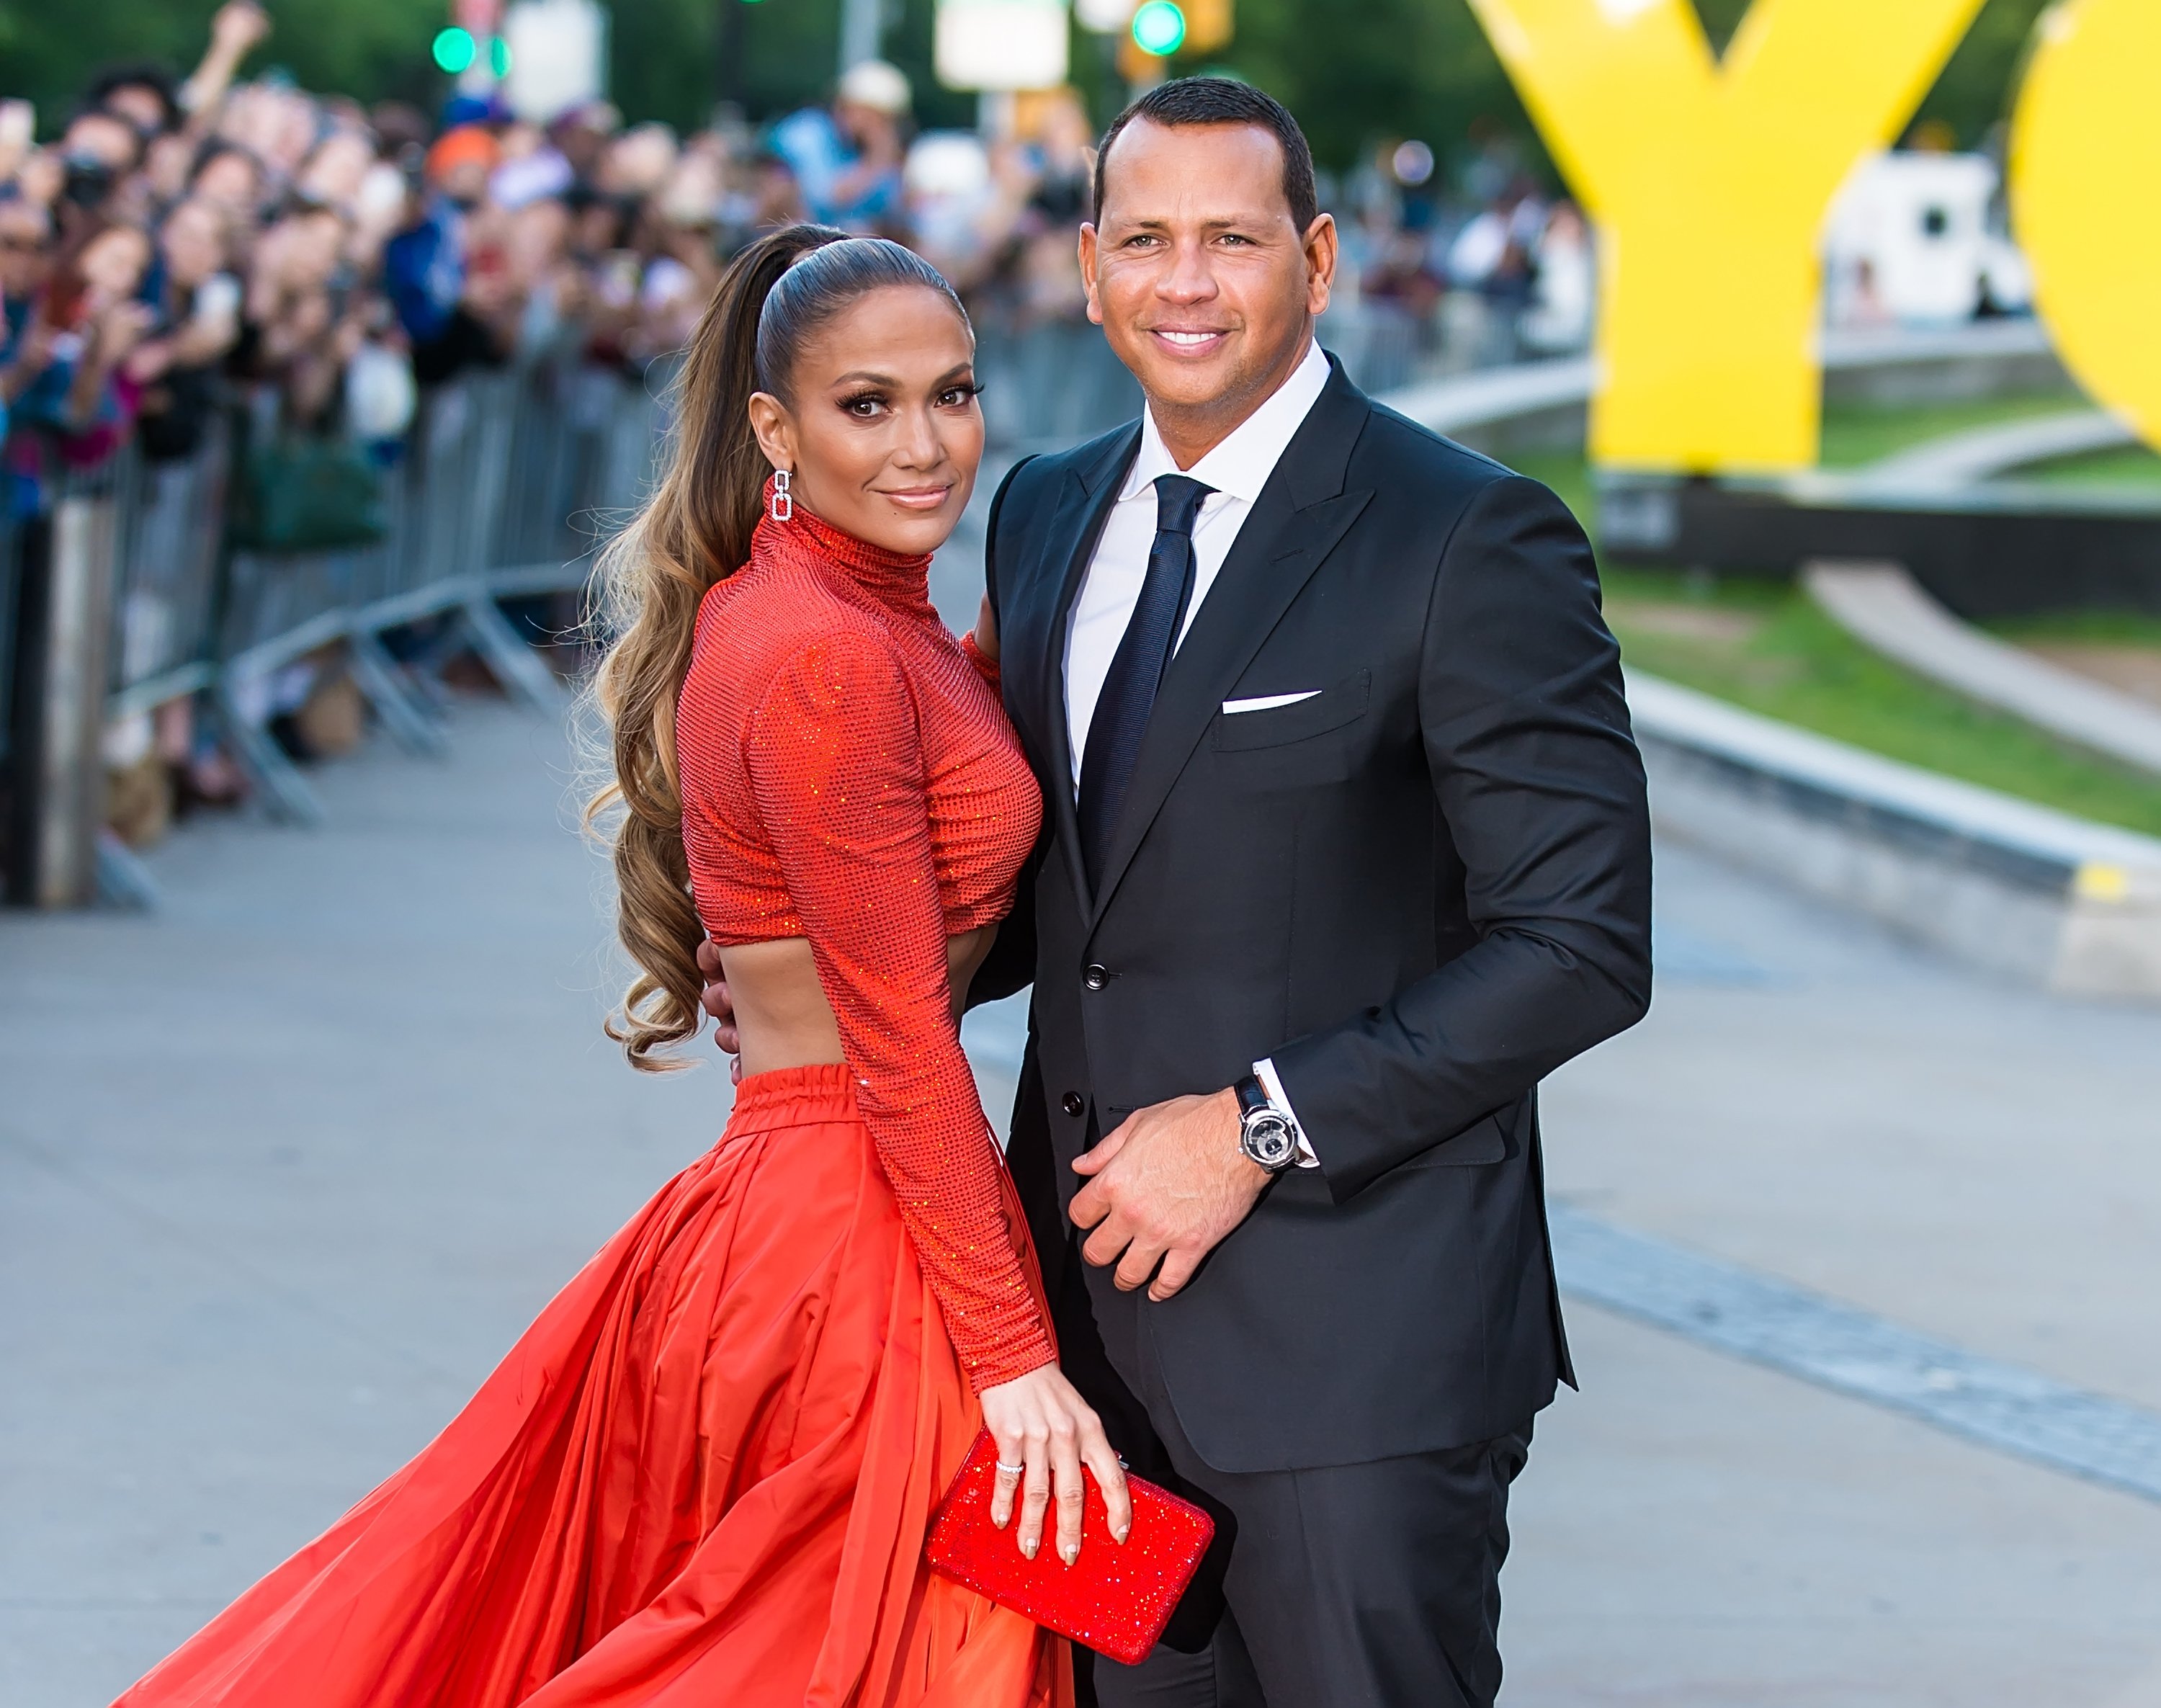 Jennifer Lopez and Alex Rodriguez pictured at the 2019 CFDA Fashion Awards. New York City. Photo: Getty Images